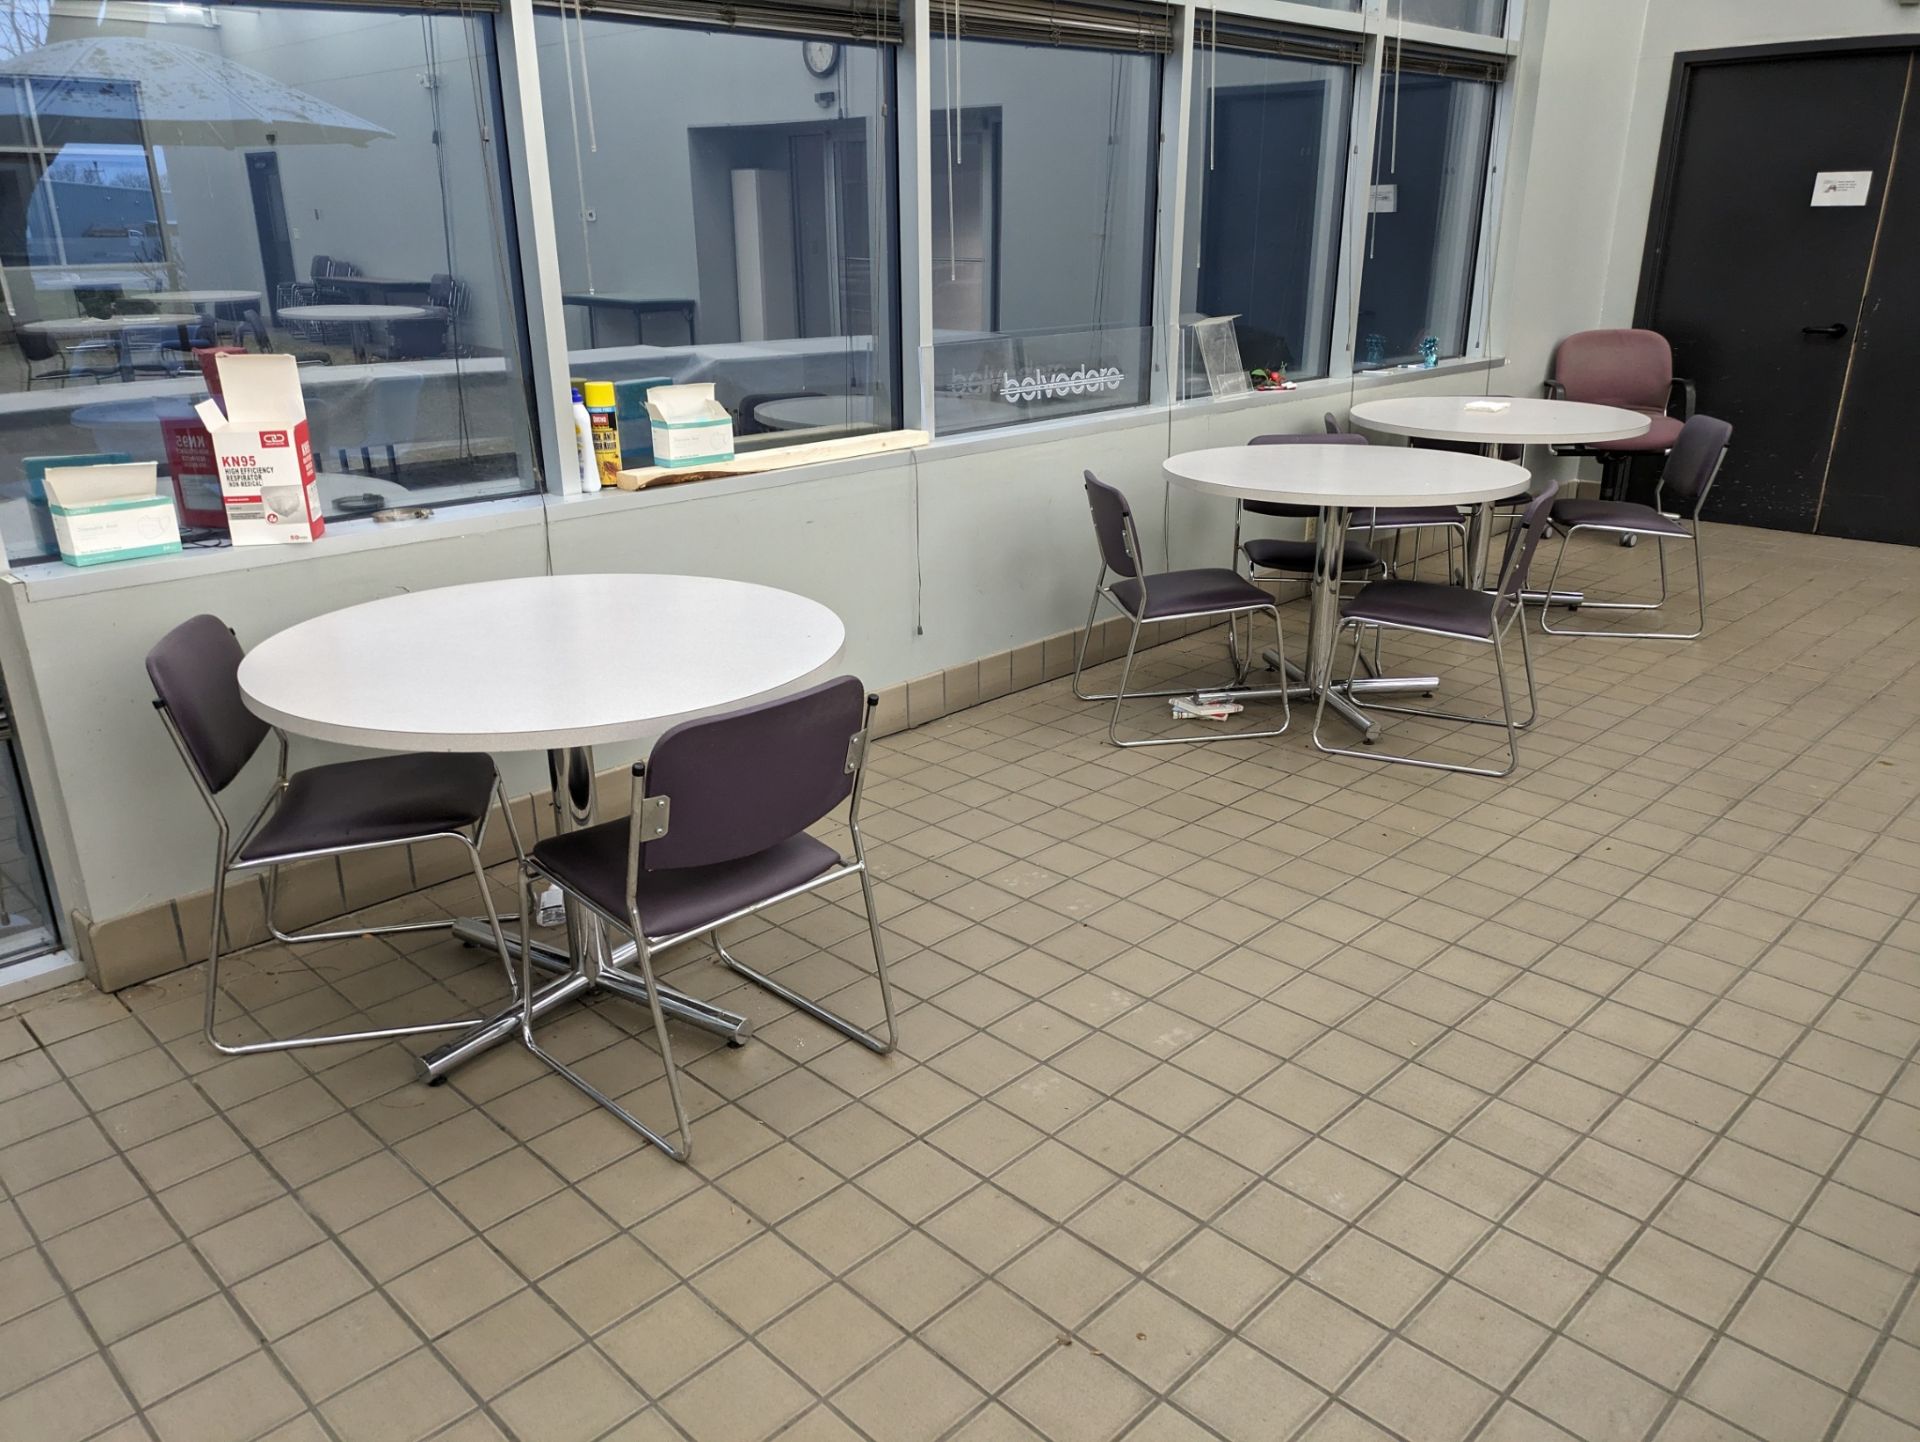 Lot of Cafeteria Furniture - Image 3 of 4